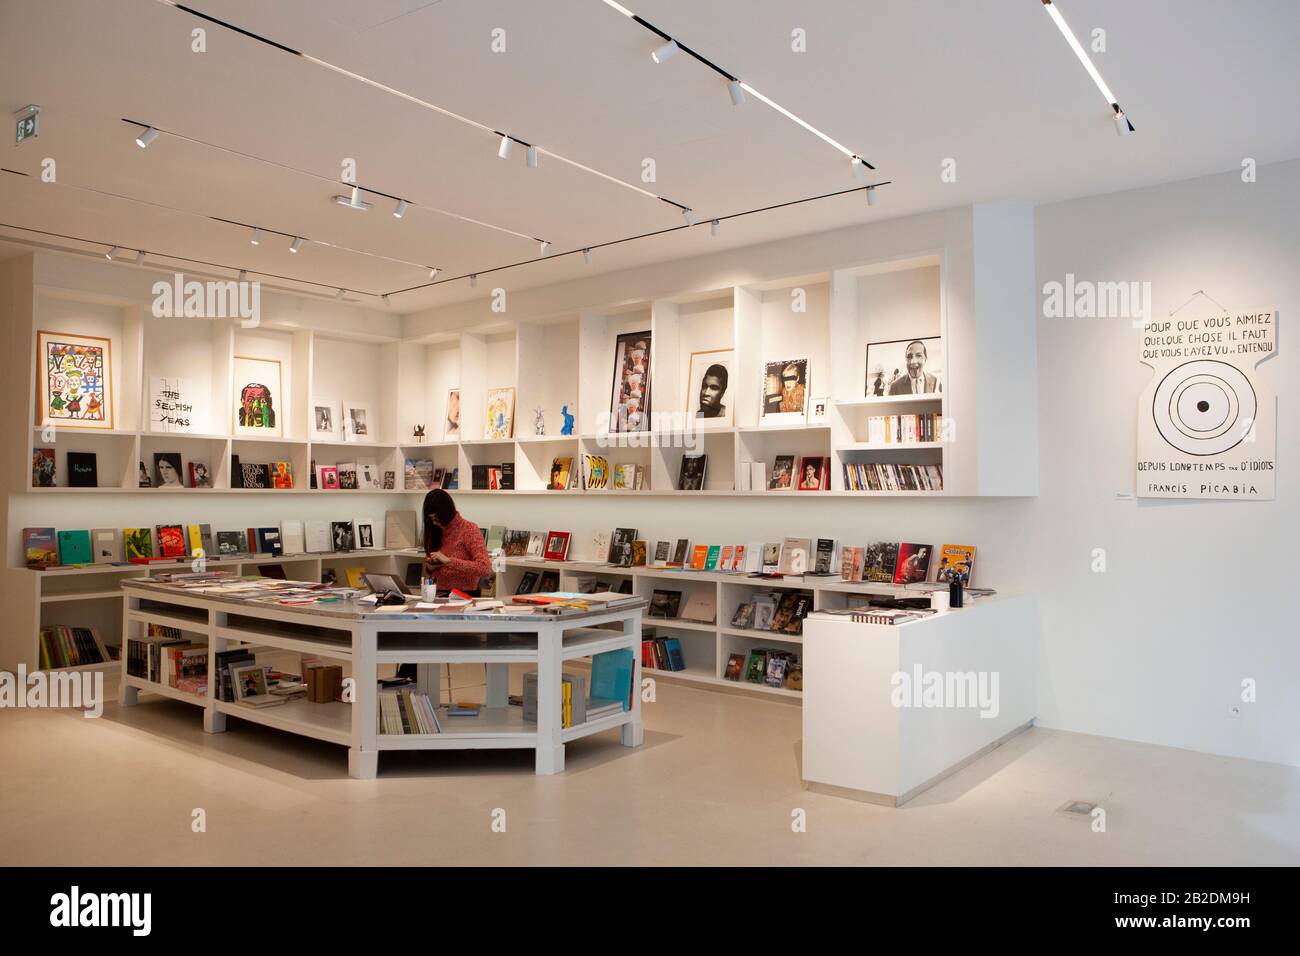 Paris: the bookshop at La Fab, a new gallery open in south-east Paris to show the contemporary art collection of fashion designer Agnes B. Artists in the collection include Jean-Michel Basquiat, Alexander Calder, Louise Bourgeois and Andy Warhol. Stock Photo